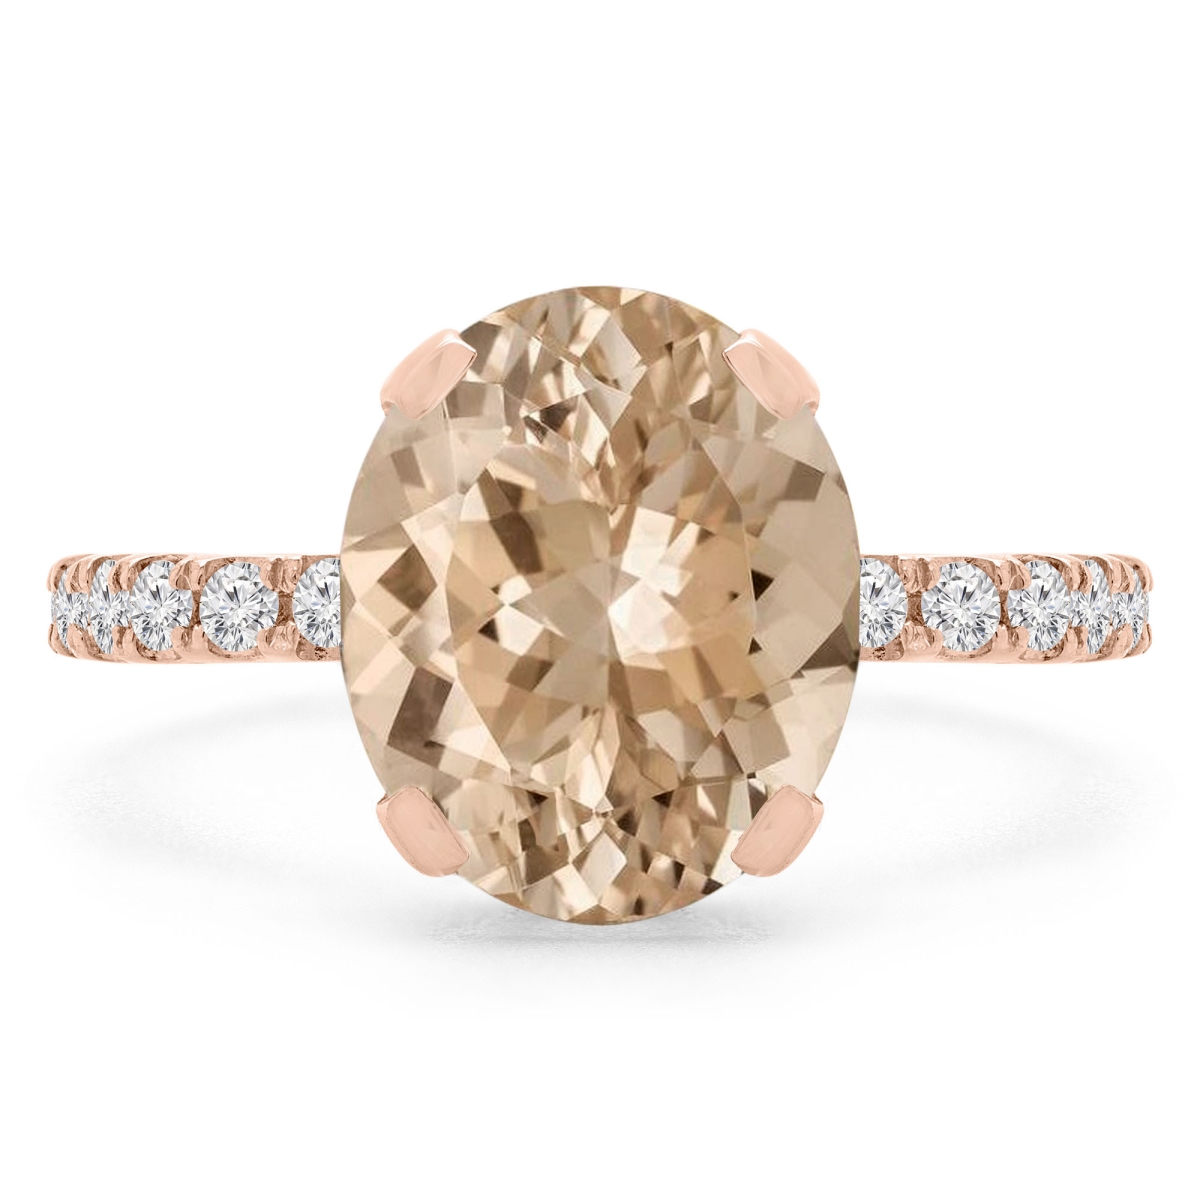 Picture of Majesty Diamonds MD190407-6.5 3.4 CTW Oval Pink Morganite Under Halo Engagement Ring in 14K Rose Gold - Size 6.5